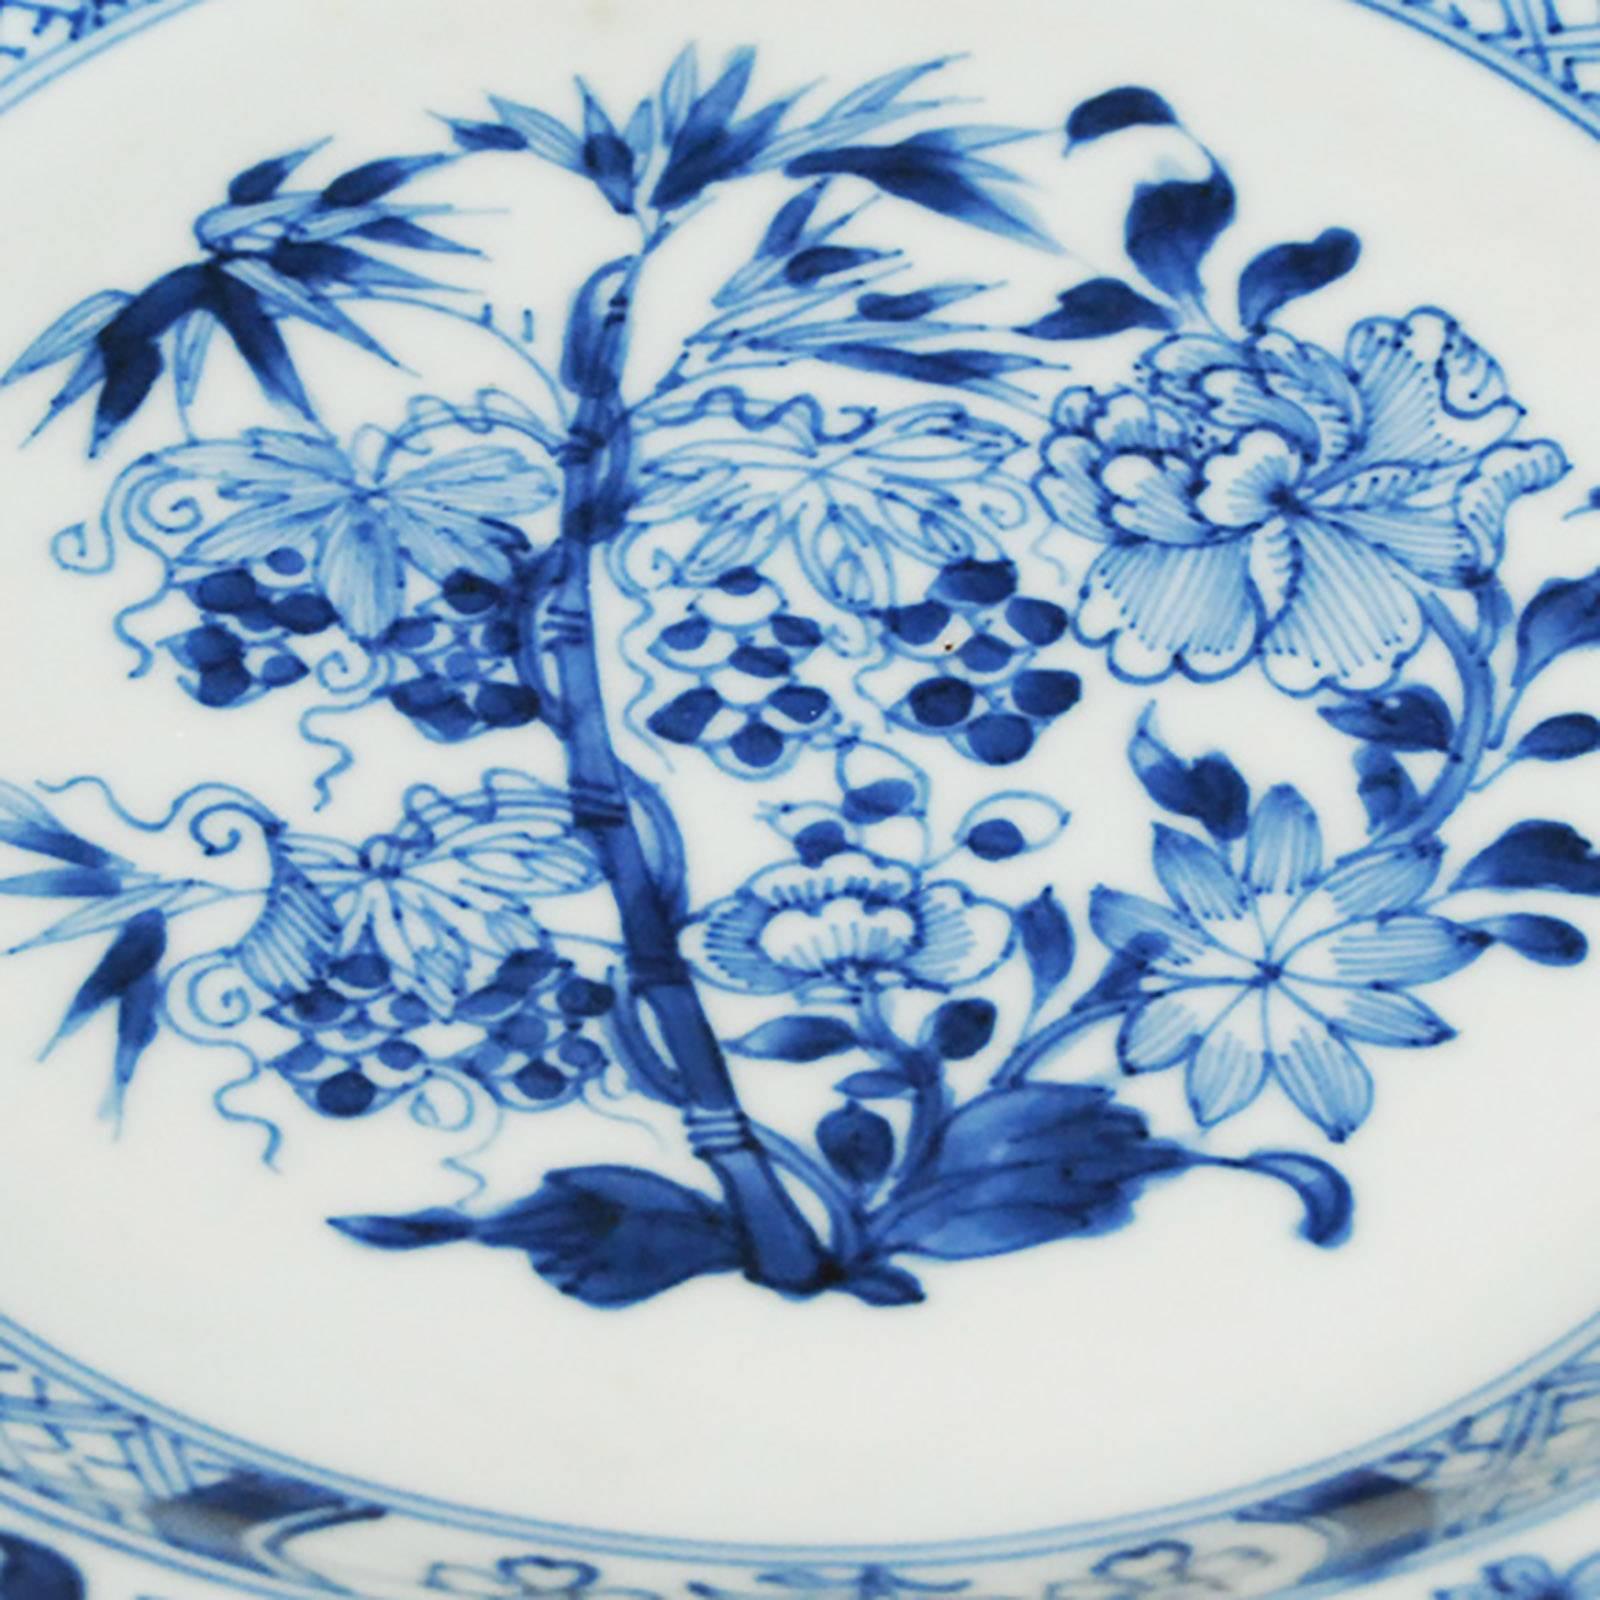 By the 19th century, Chinese painted porcelains were sought after the world over. This hand-painted plate, decorated with an intricate floral pattern in the famous blue-and-white design, was produced in China, for export to Europe.

 